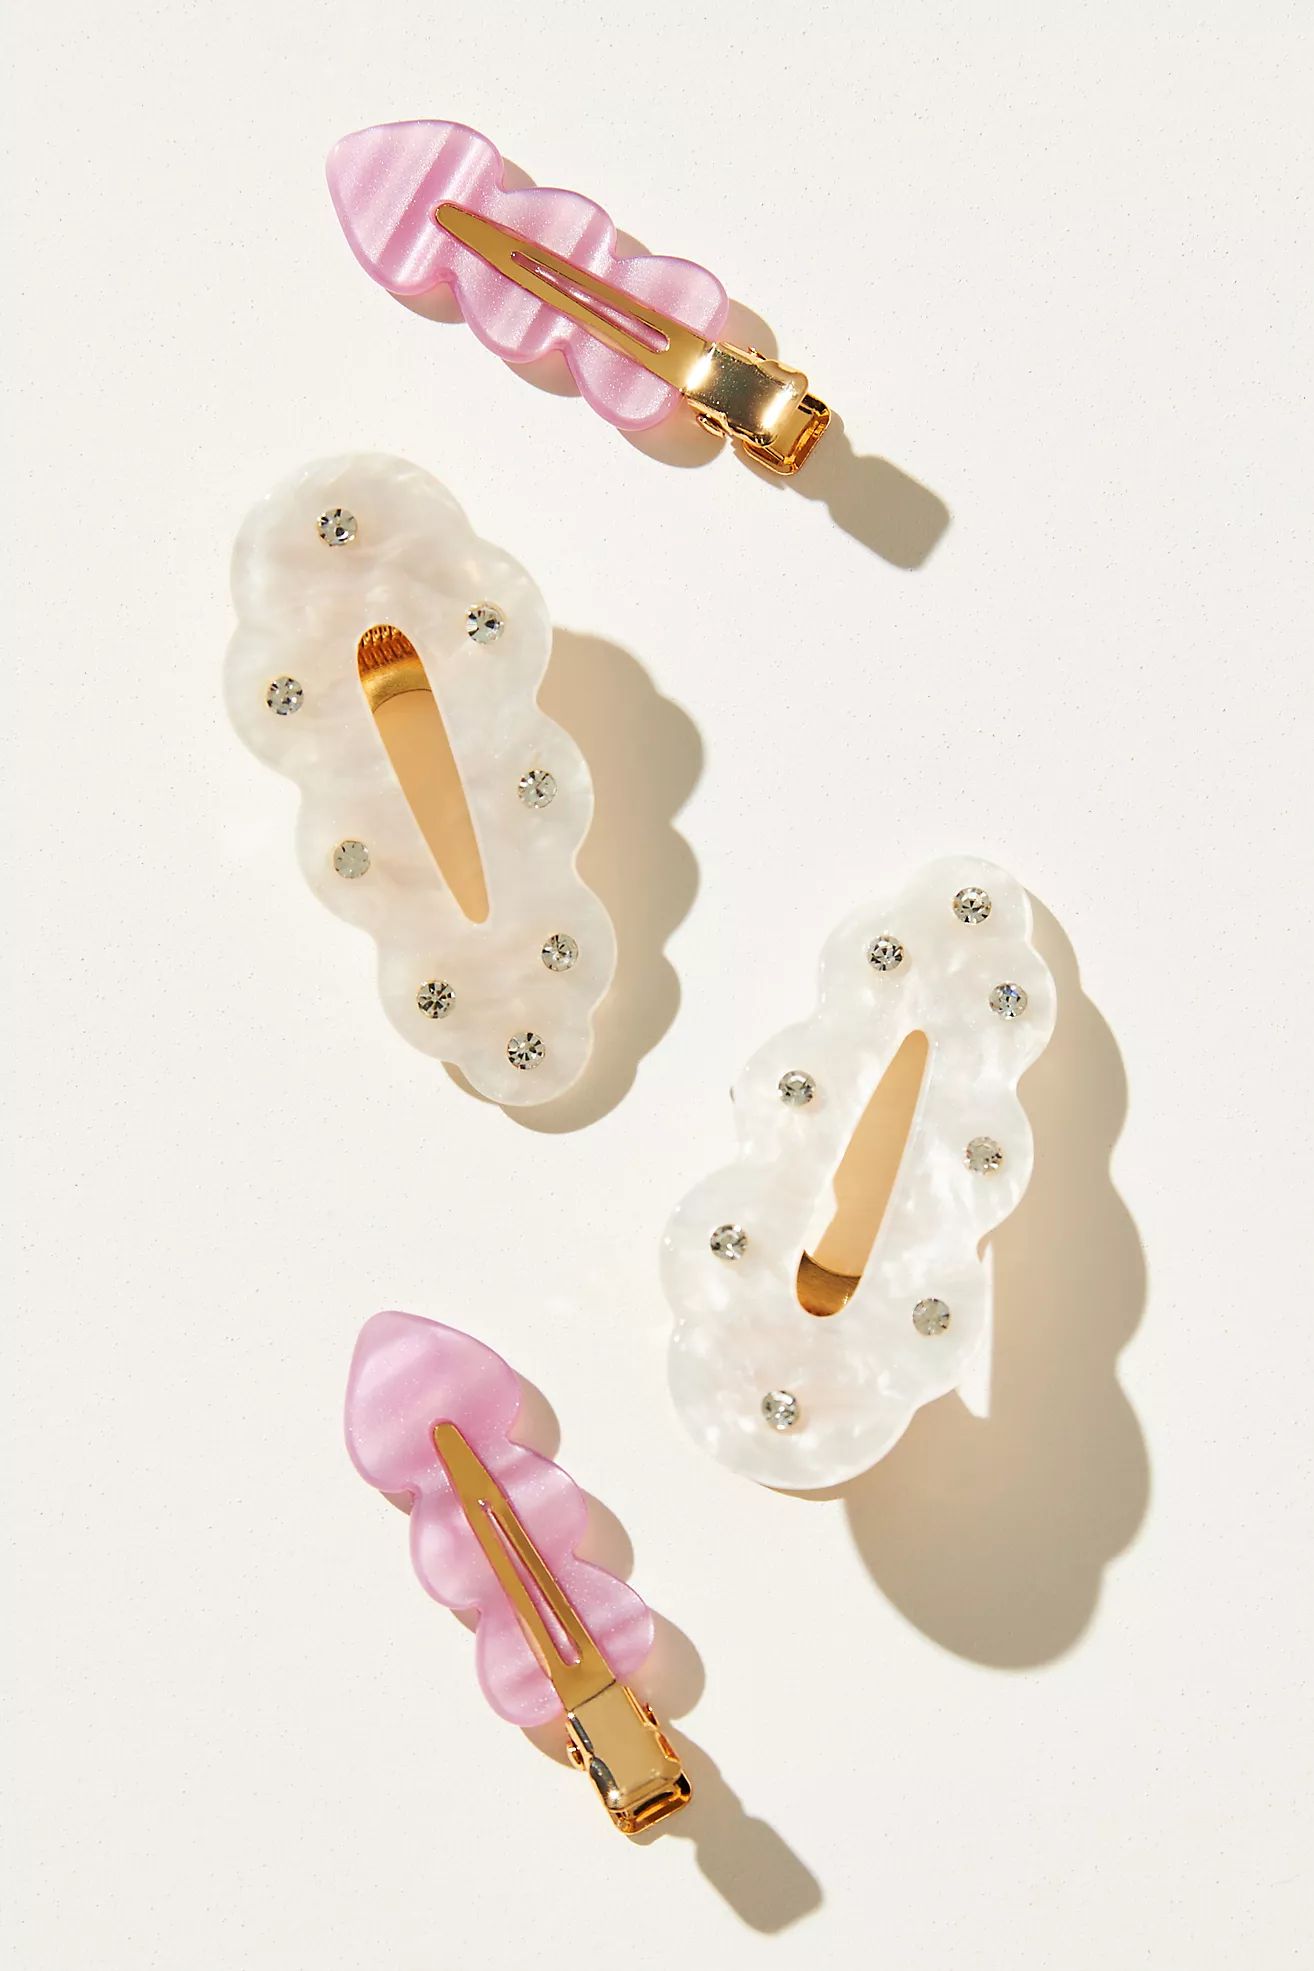 Glow Ready Crease-Free Hair Clips, Set of 4 | Anthropologie (US)